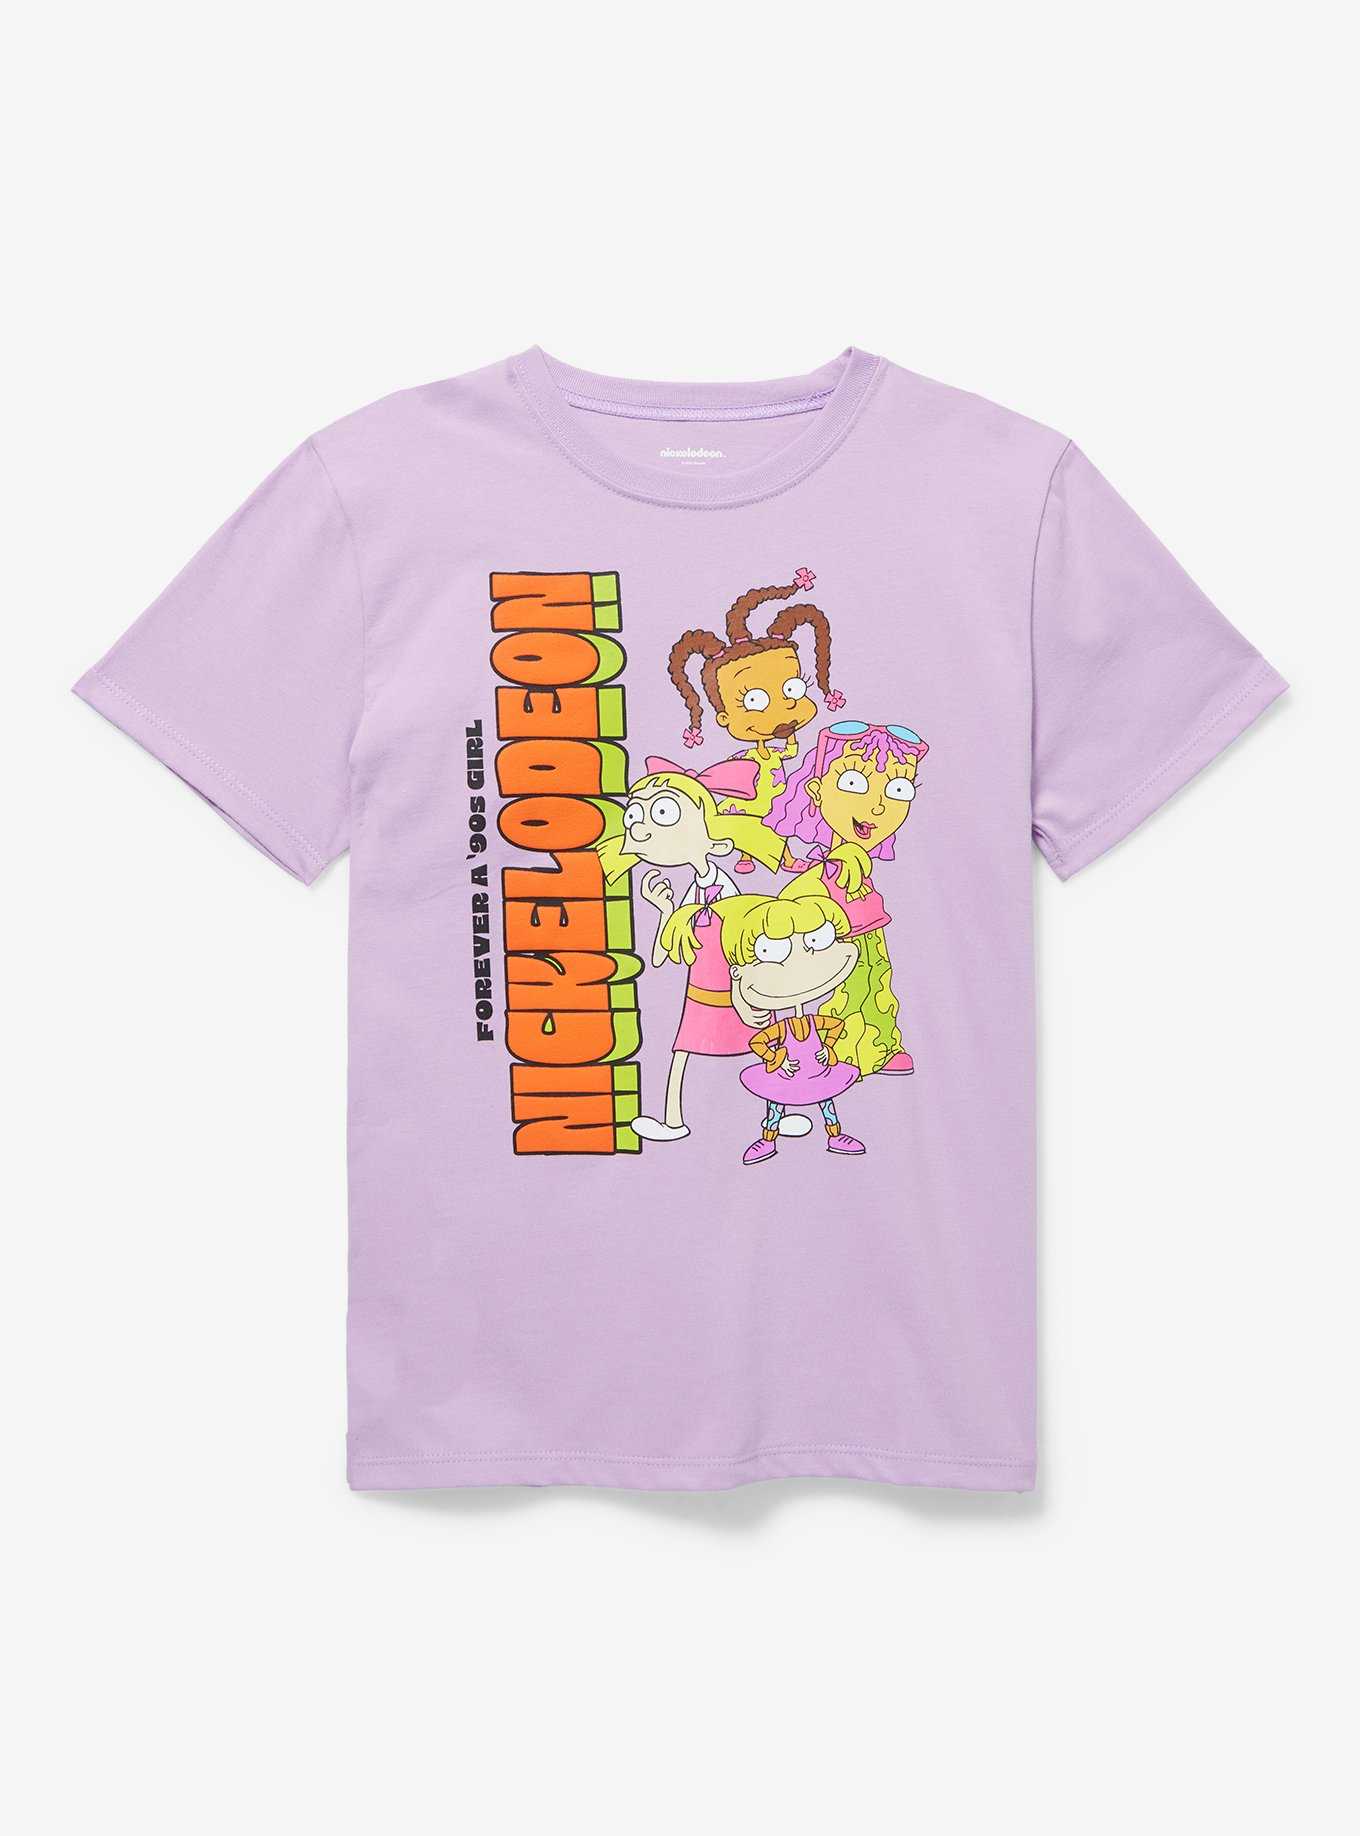 Nickelodeon Cartoon Girls Group Portrait Youth T-Shirt - BoxLunch Exclusive, , hi-res